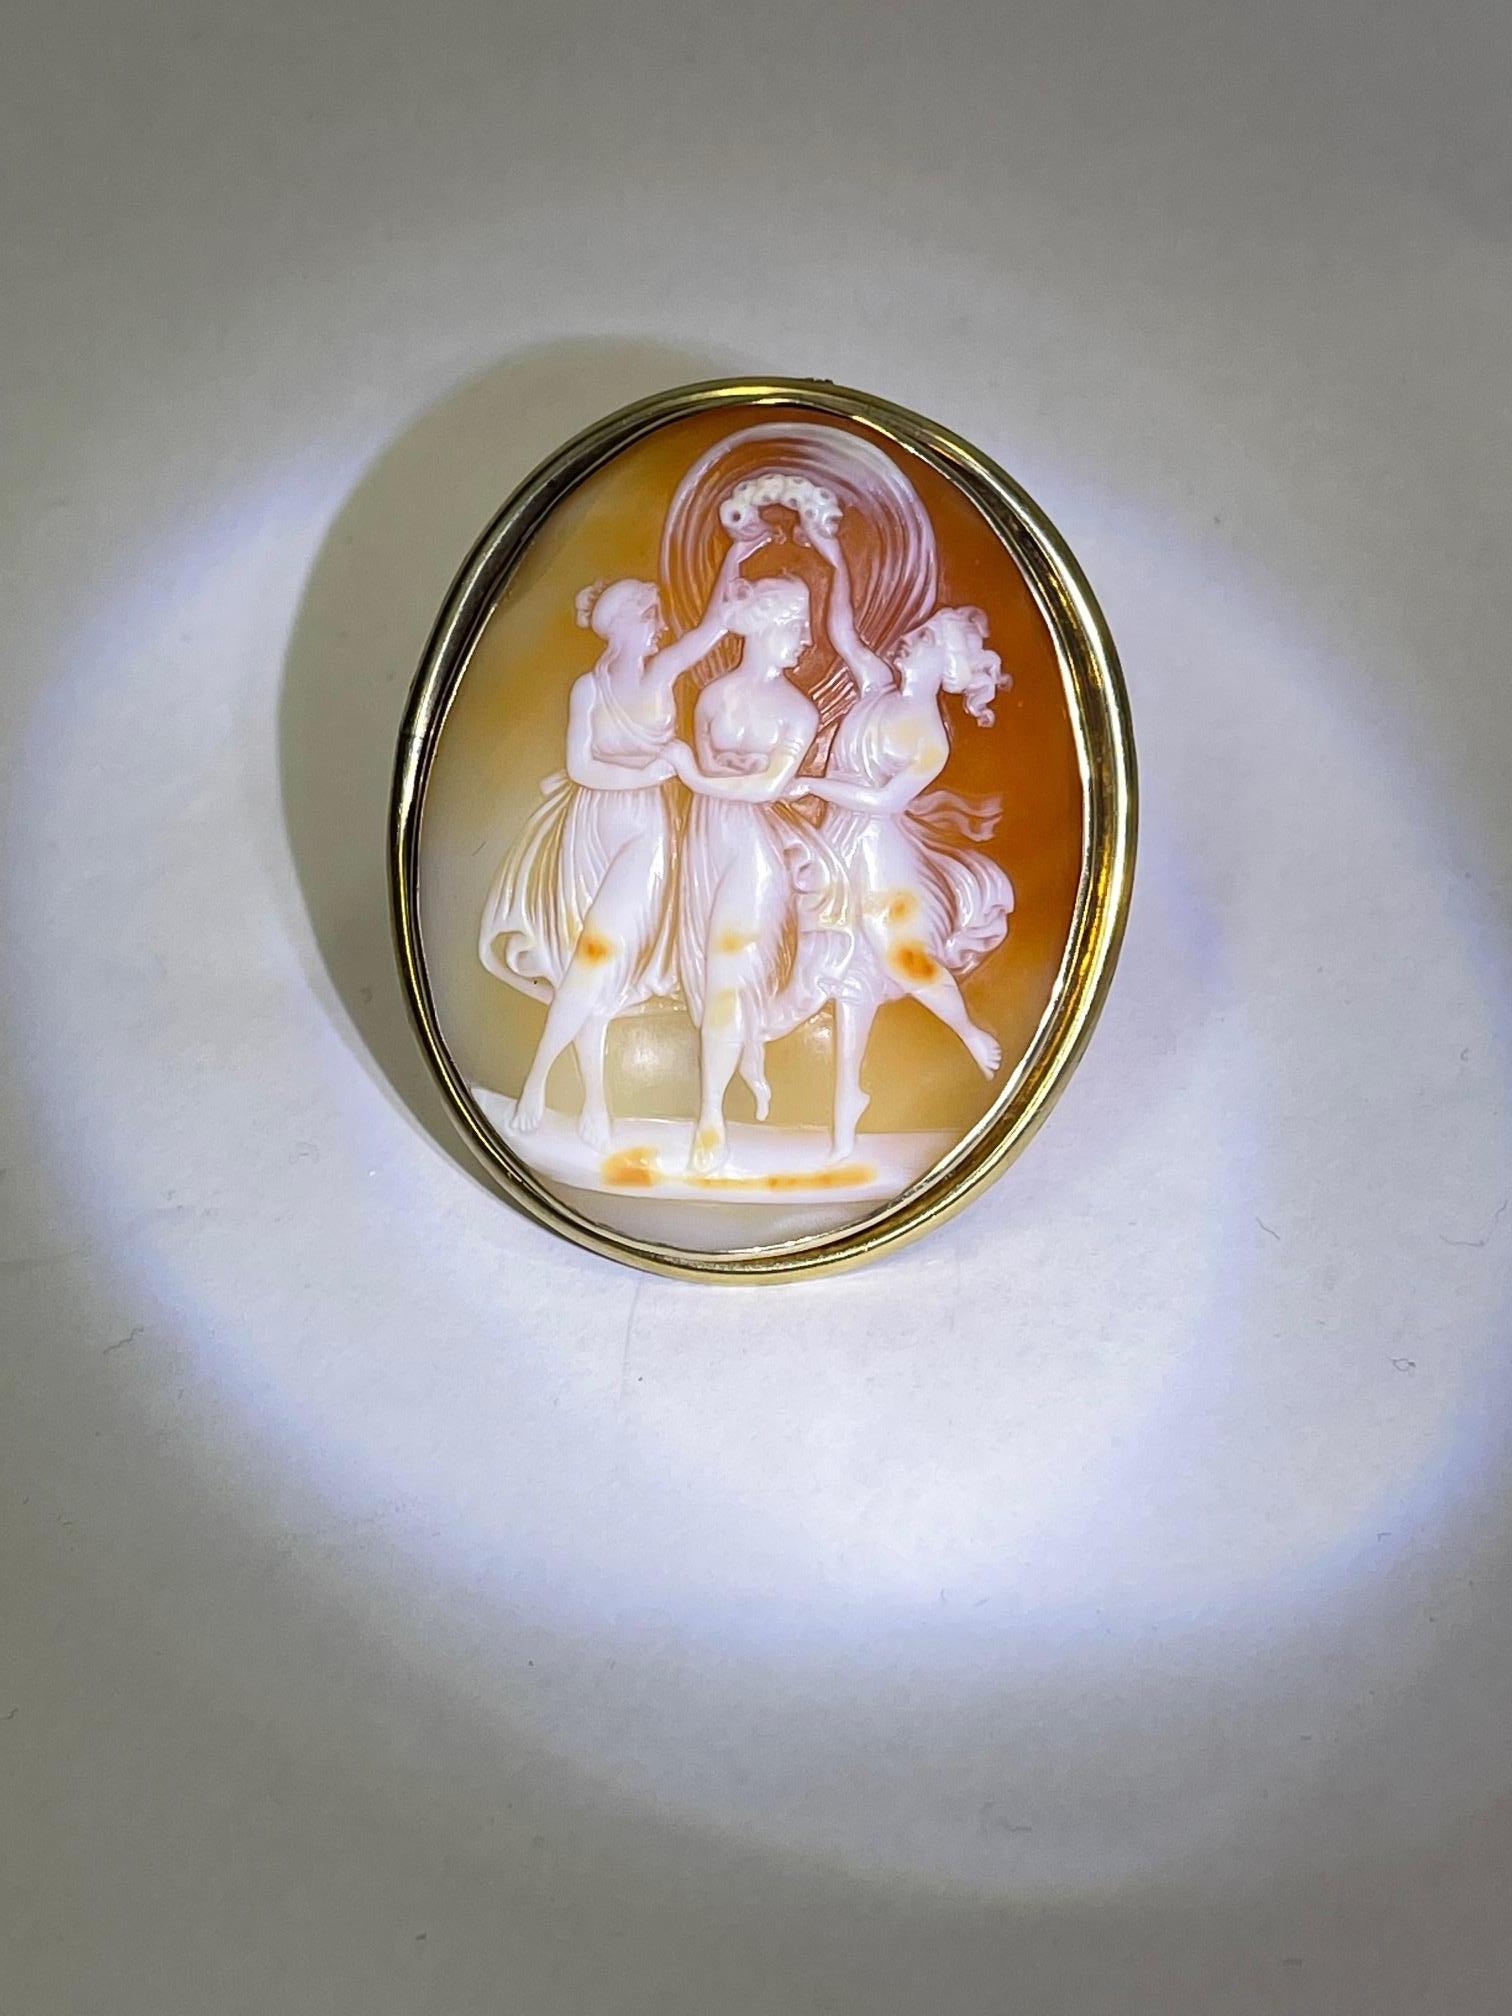 Simply Beautiful! Elegant and Stylish Antique Cameo Brooch Pendant depicting The Three Graces; Beautifully Hand Carved in High Relief Estate piece; Meticulously artisan engraved with exquisite detail, this romantic natural carnelian shell cameo is